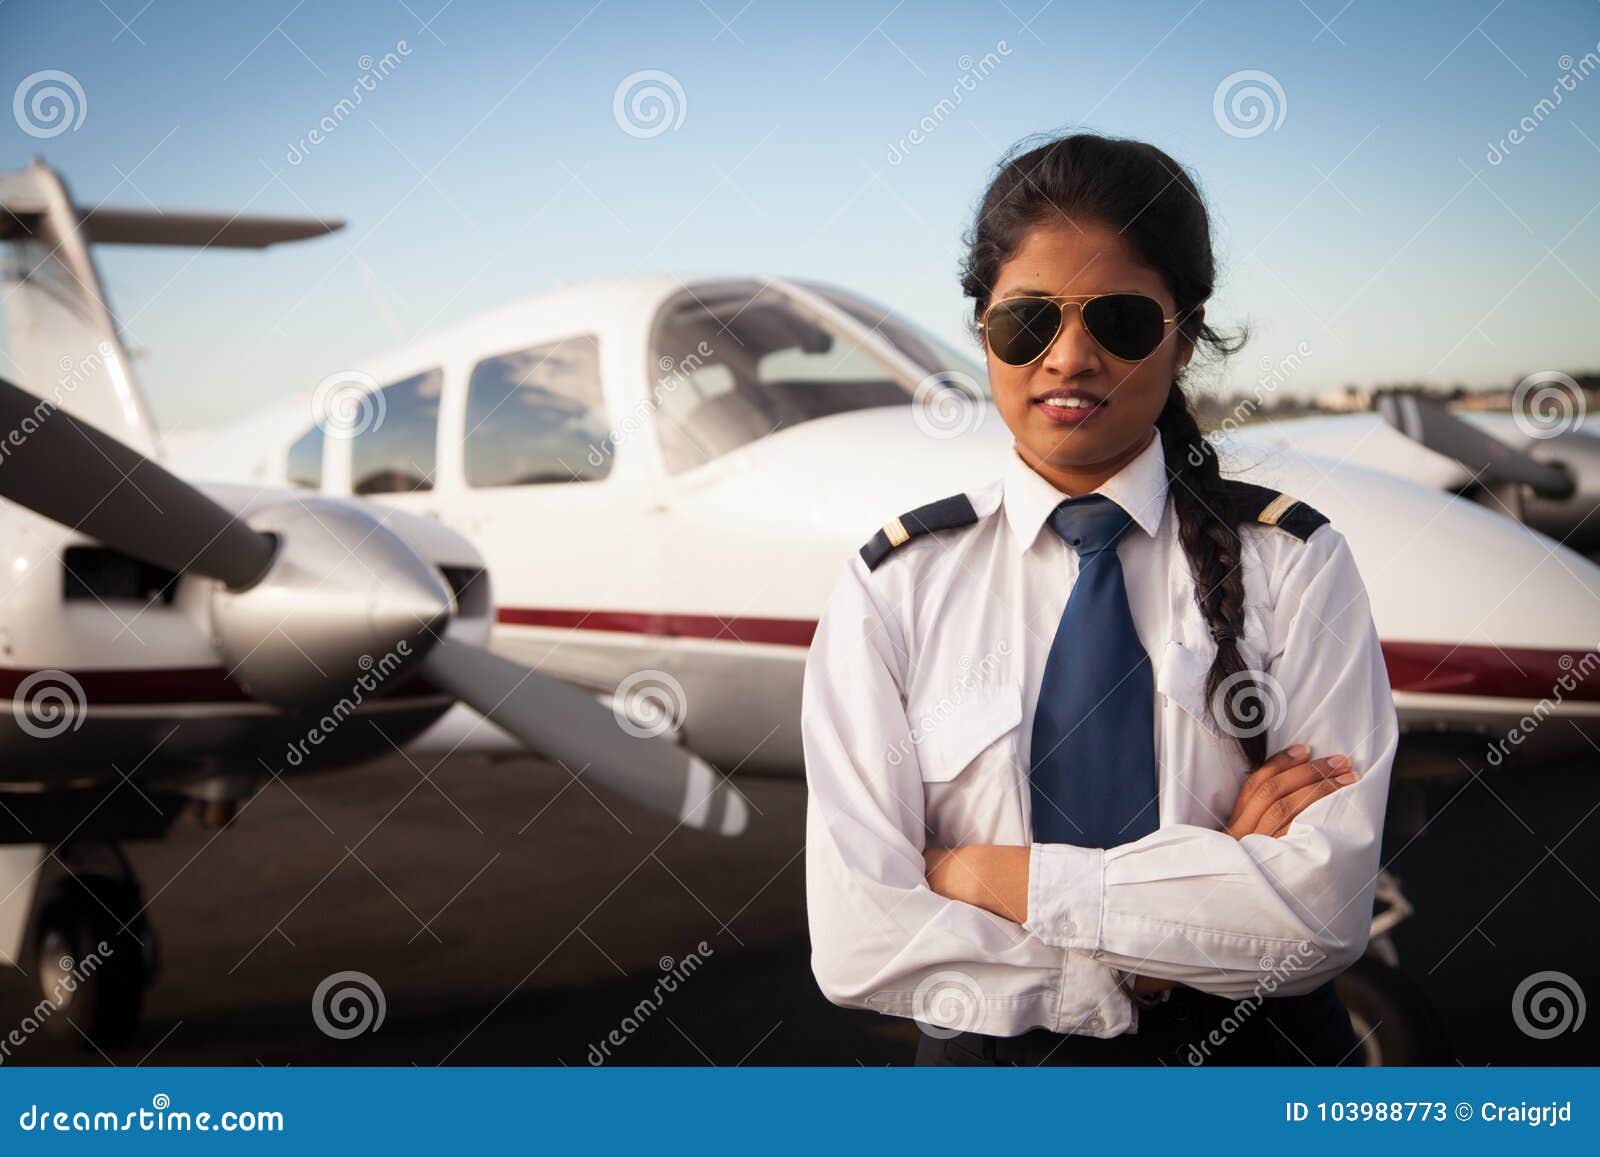 female pilot waiting in front of her aircraft